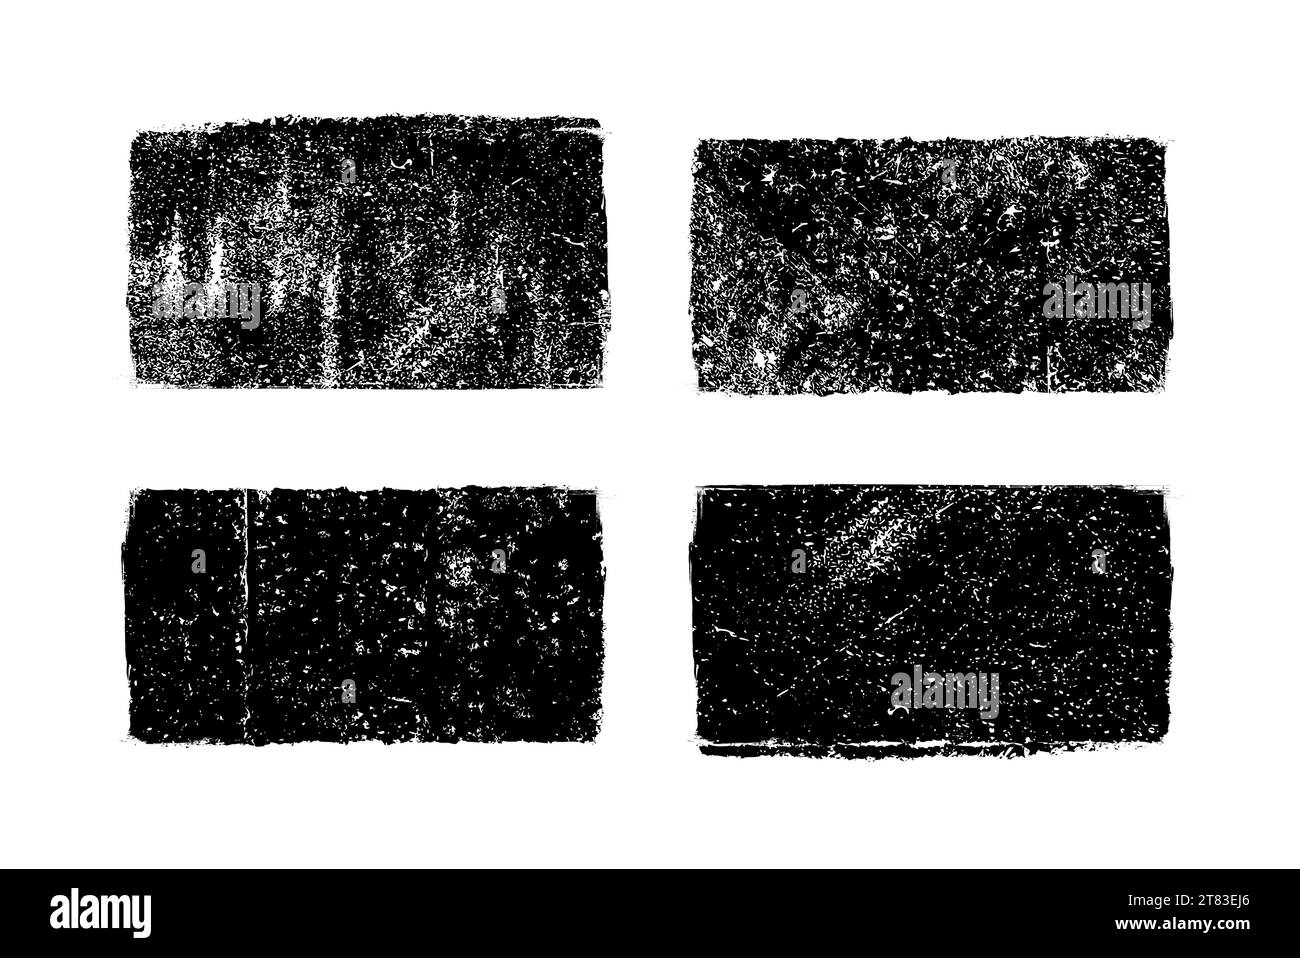 Top 10 blue square grunge textured isolated stamp Stock Photo by